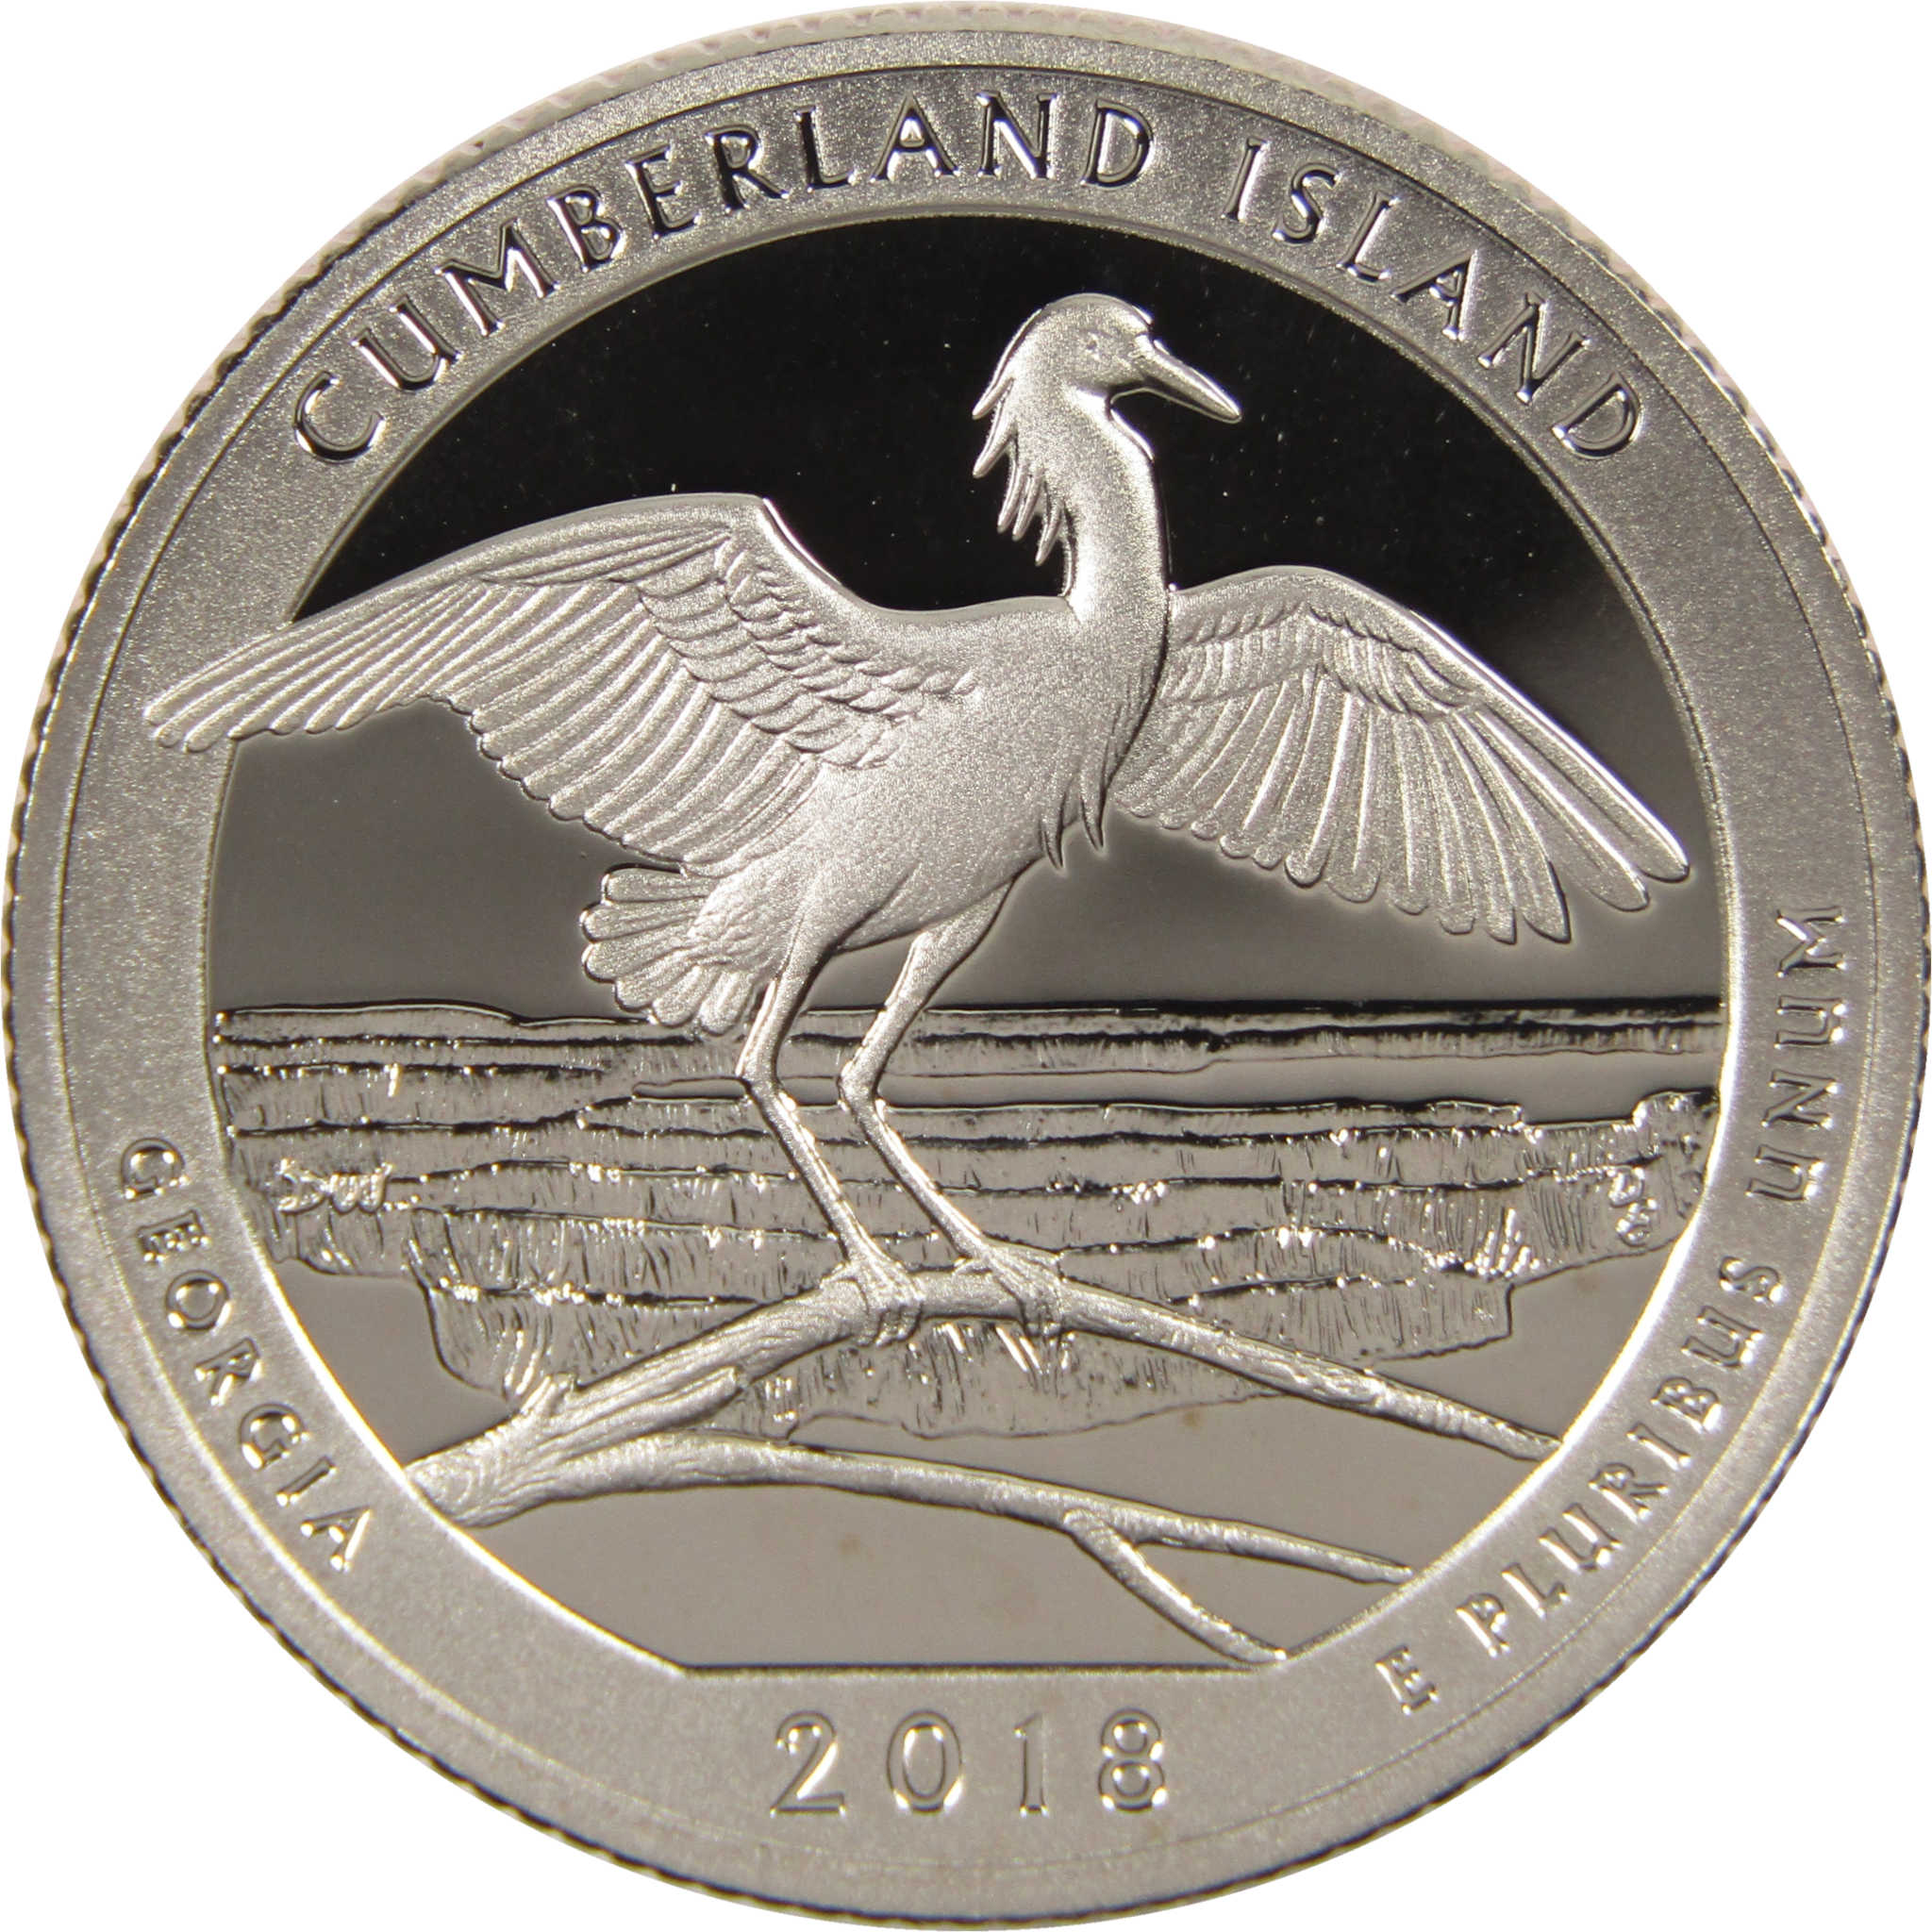 2018 S Cumberland Island National Park Quarter Choice Proof Clad Coin